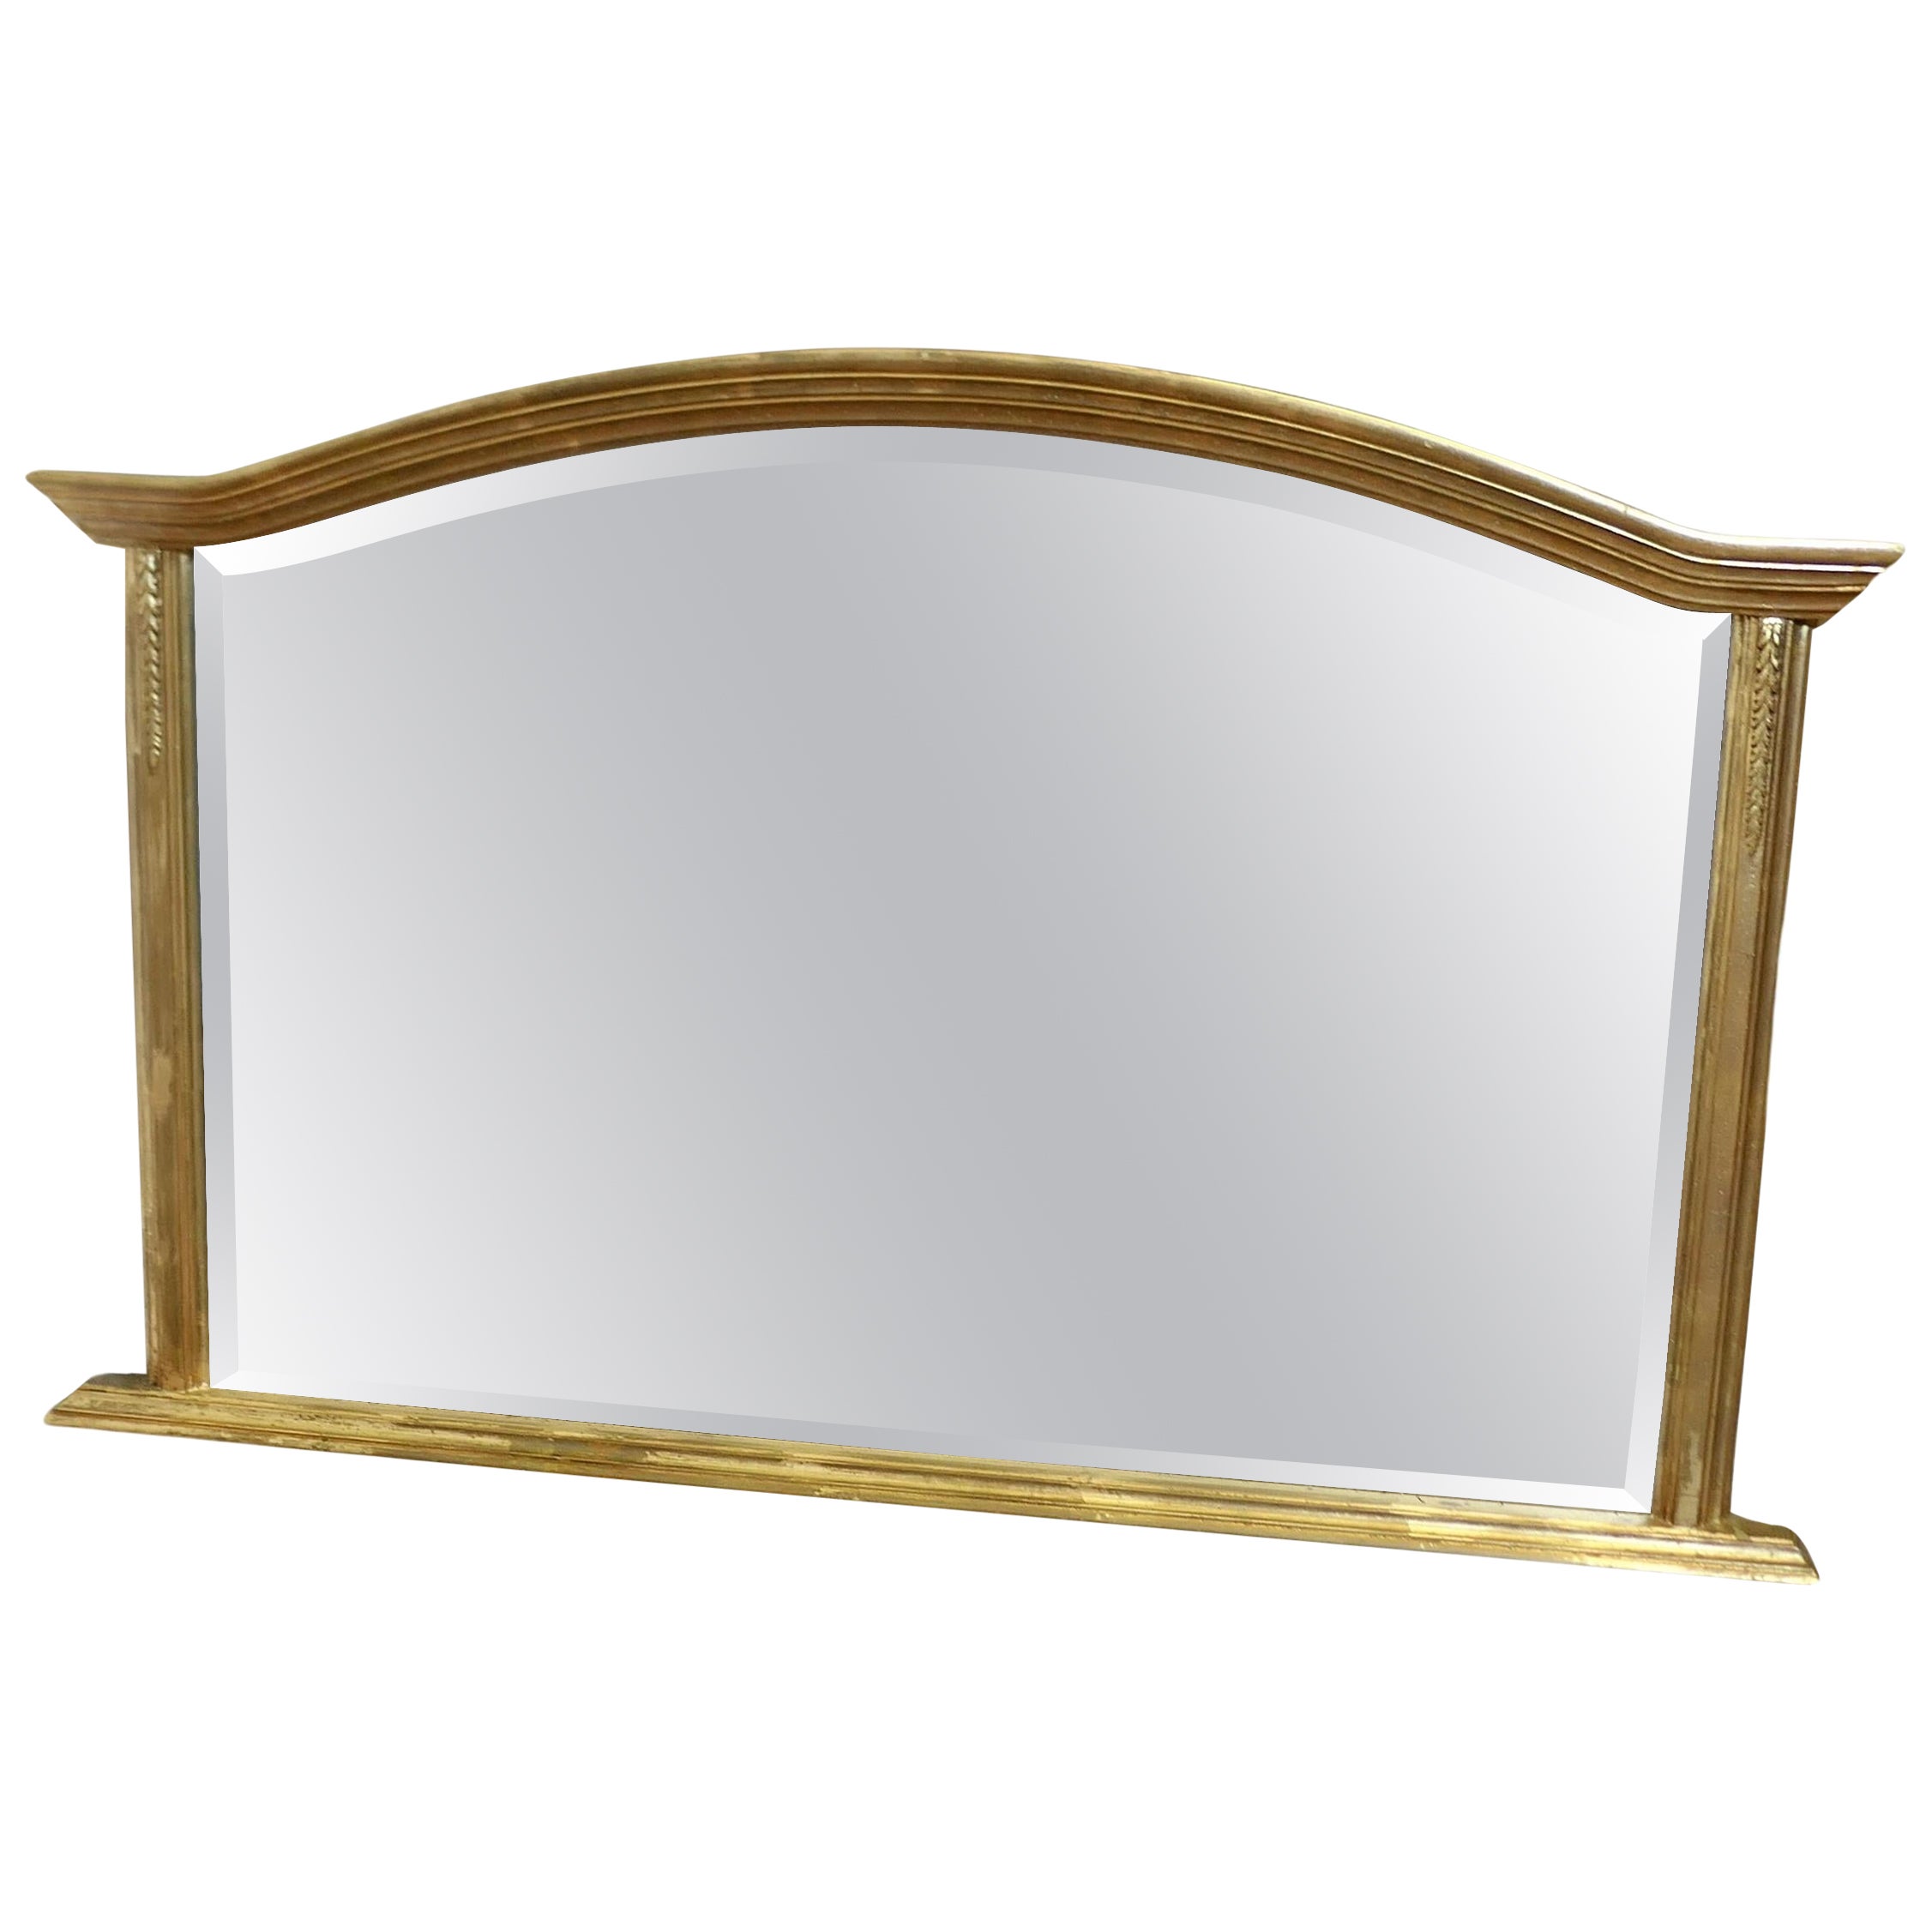 Victorian Style Arched Gold Overmantel Mirror  A Lovely Over Mantle Mirror    For Sale